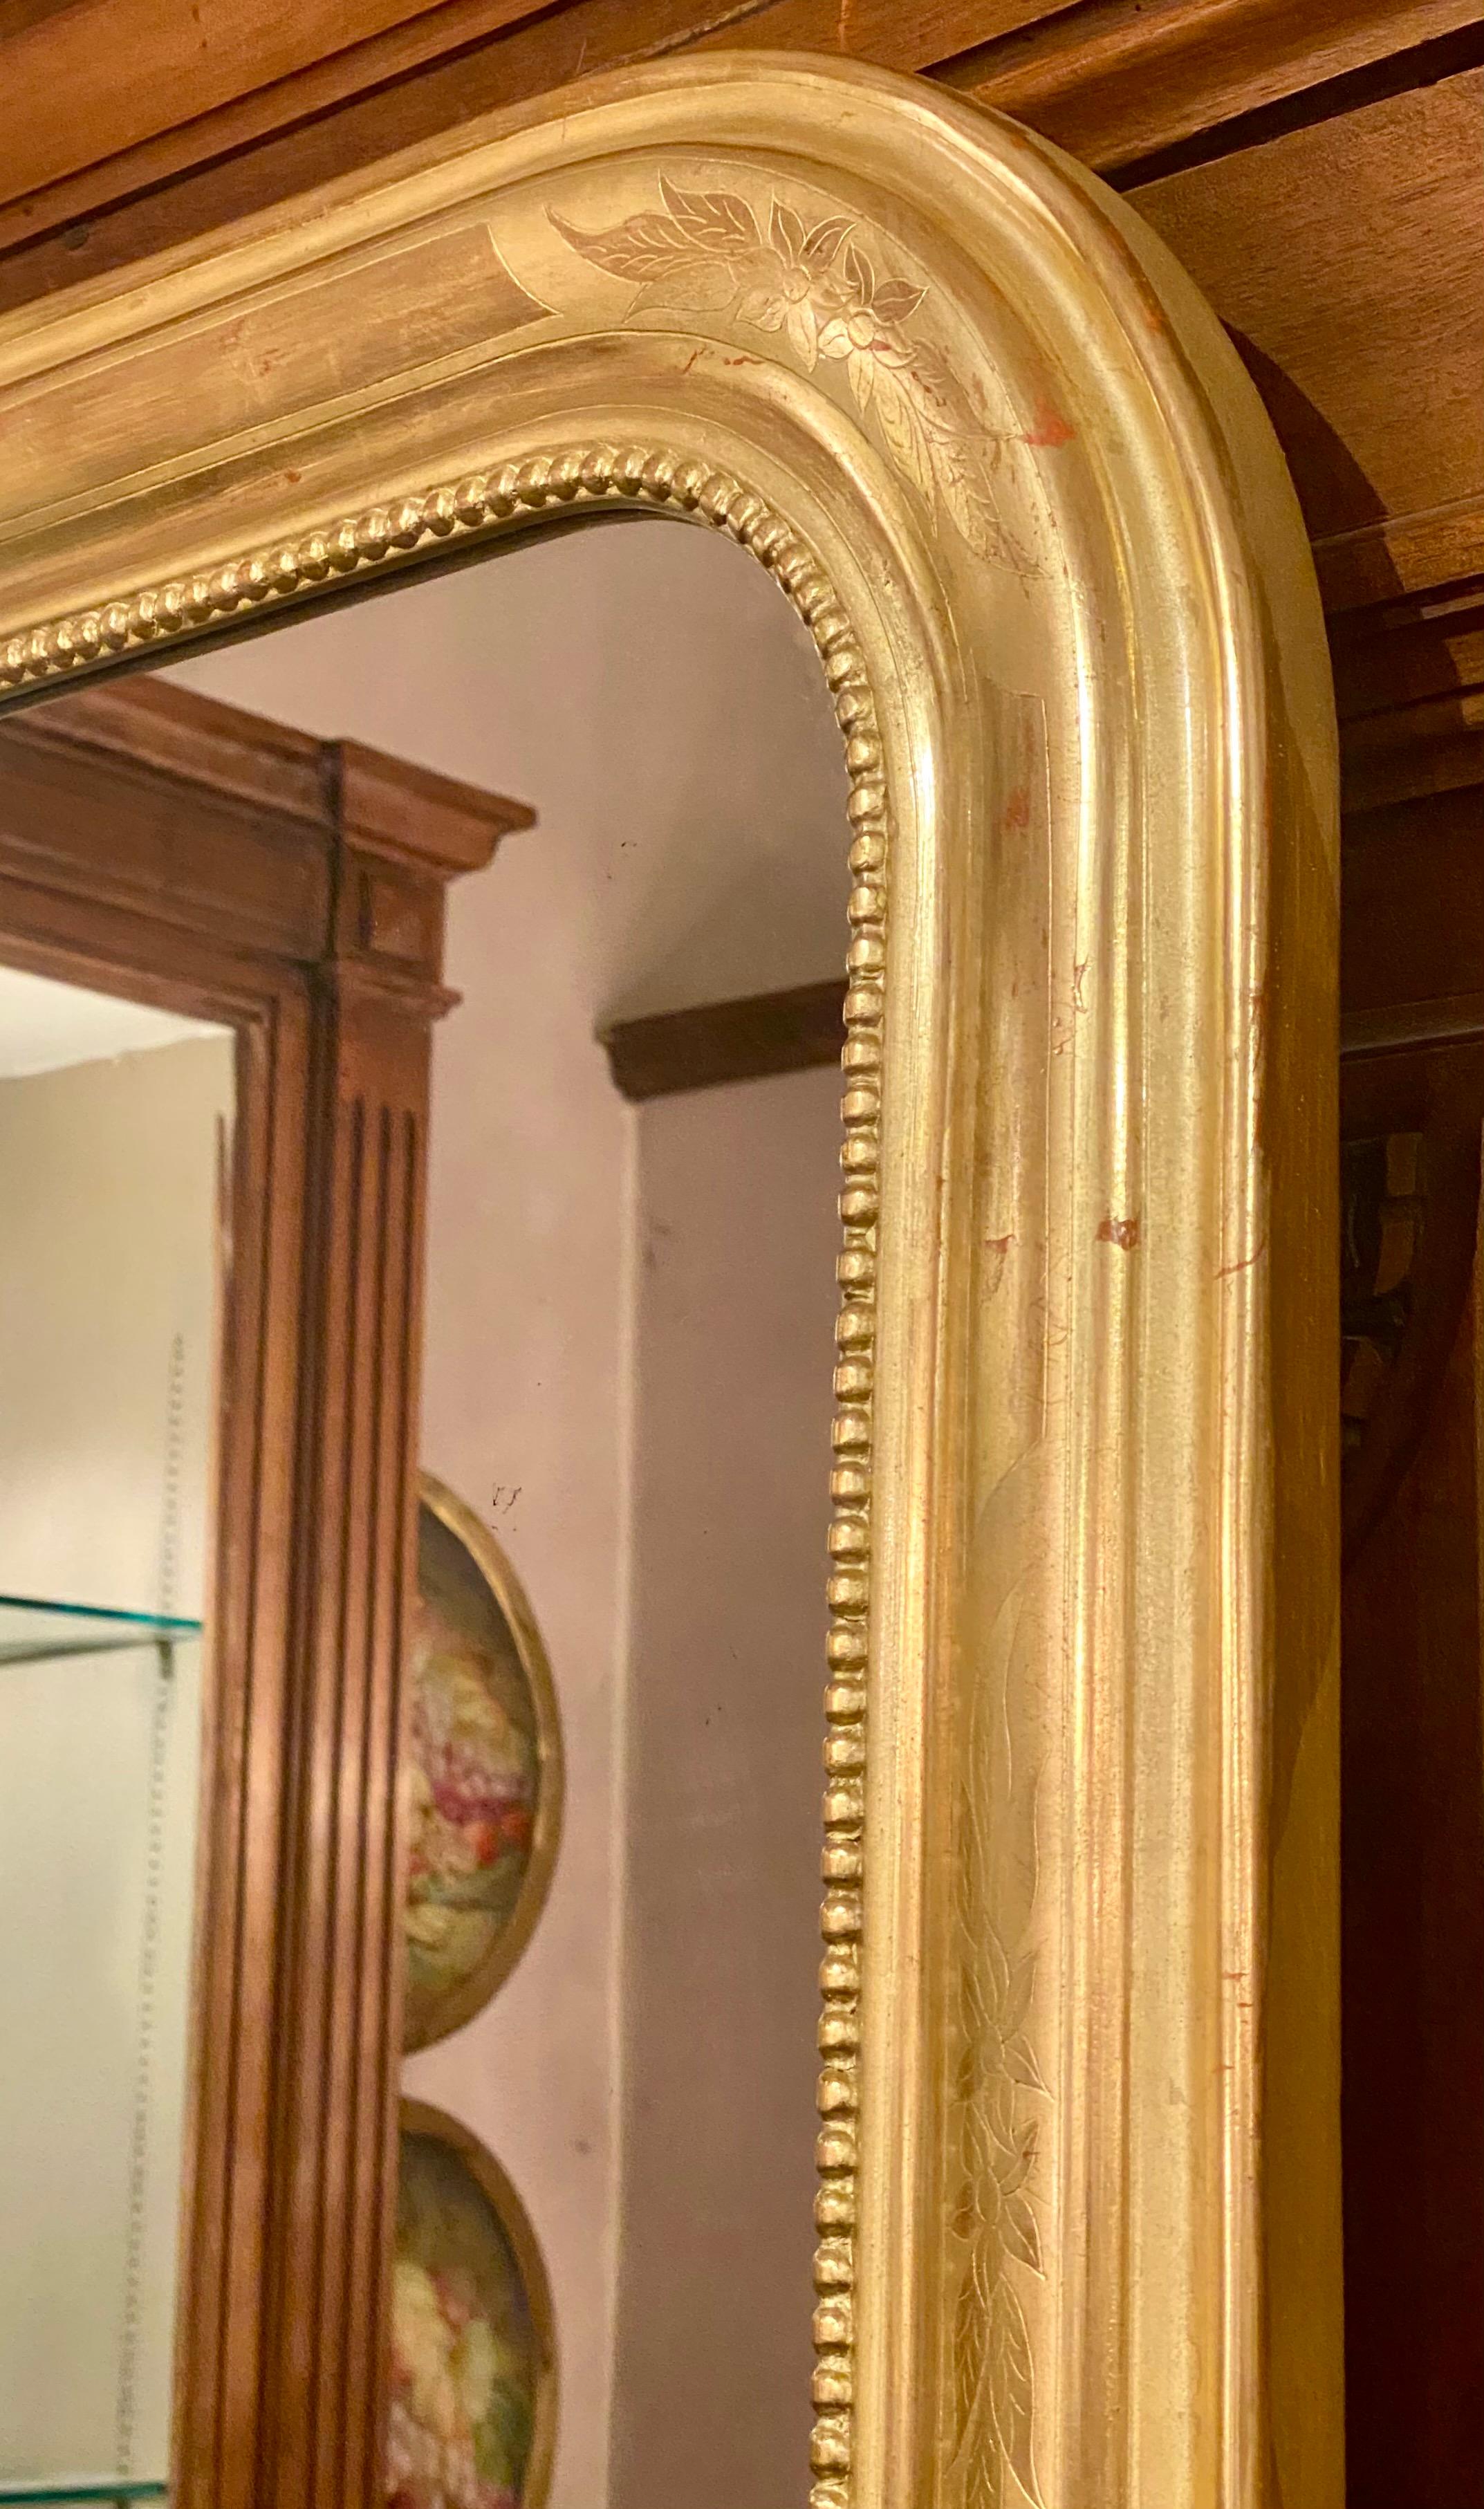 Pair of antique French Louis Philippe gold leaf mirrors, circa 1890.
MIR233.